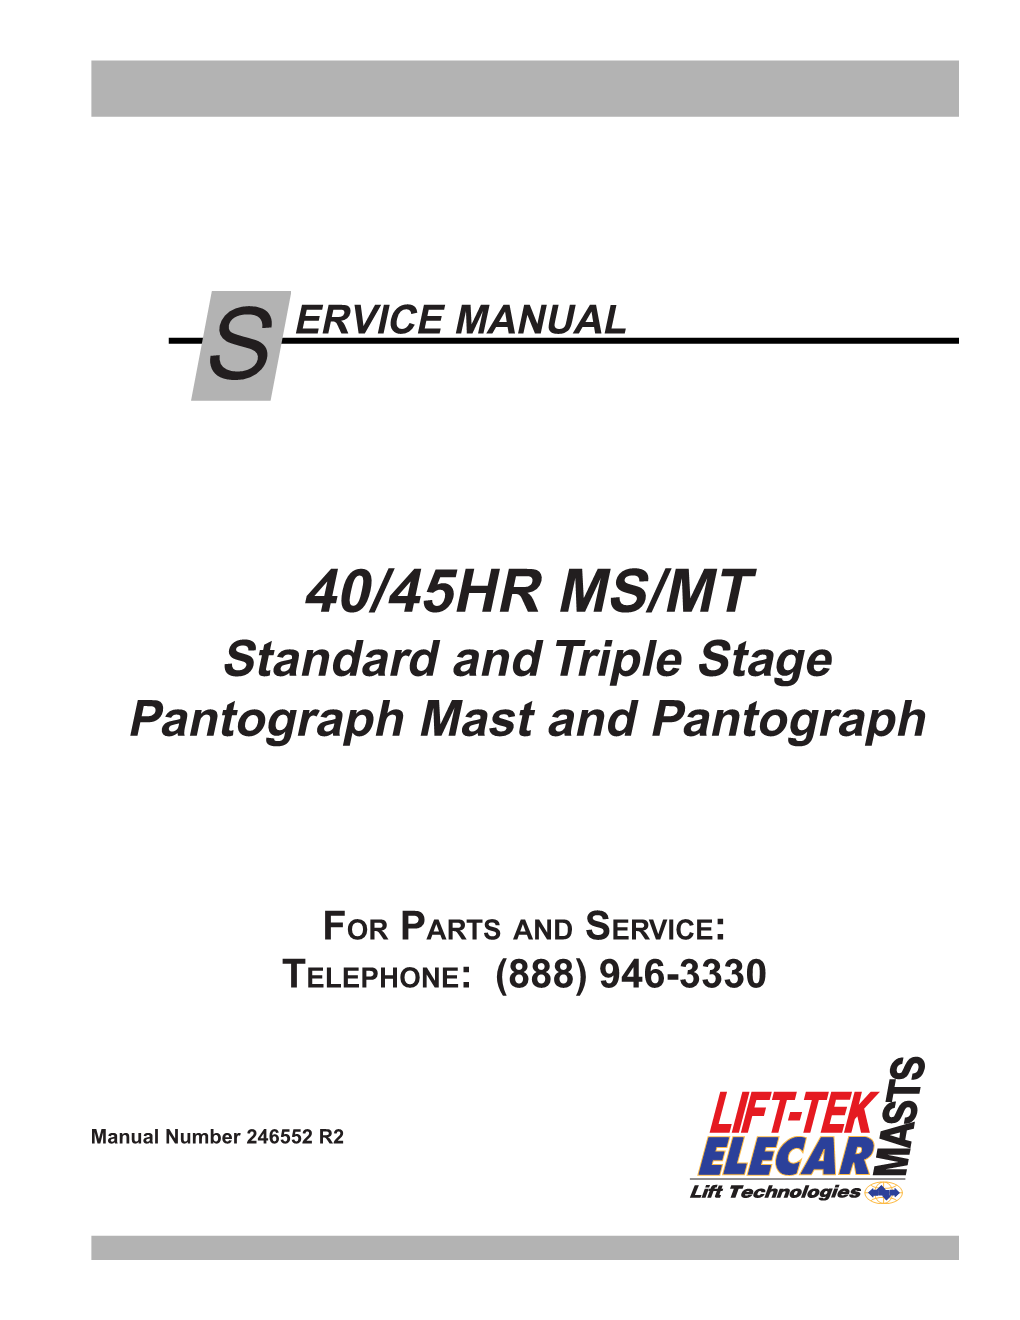 40/45HR MS/MT Standard and Triple Stage Pantograph Mast and Pantograph